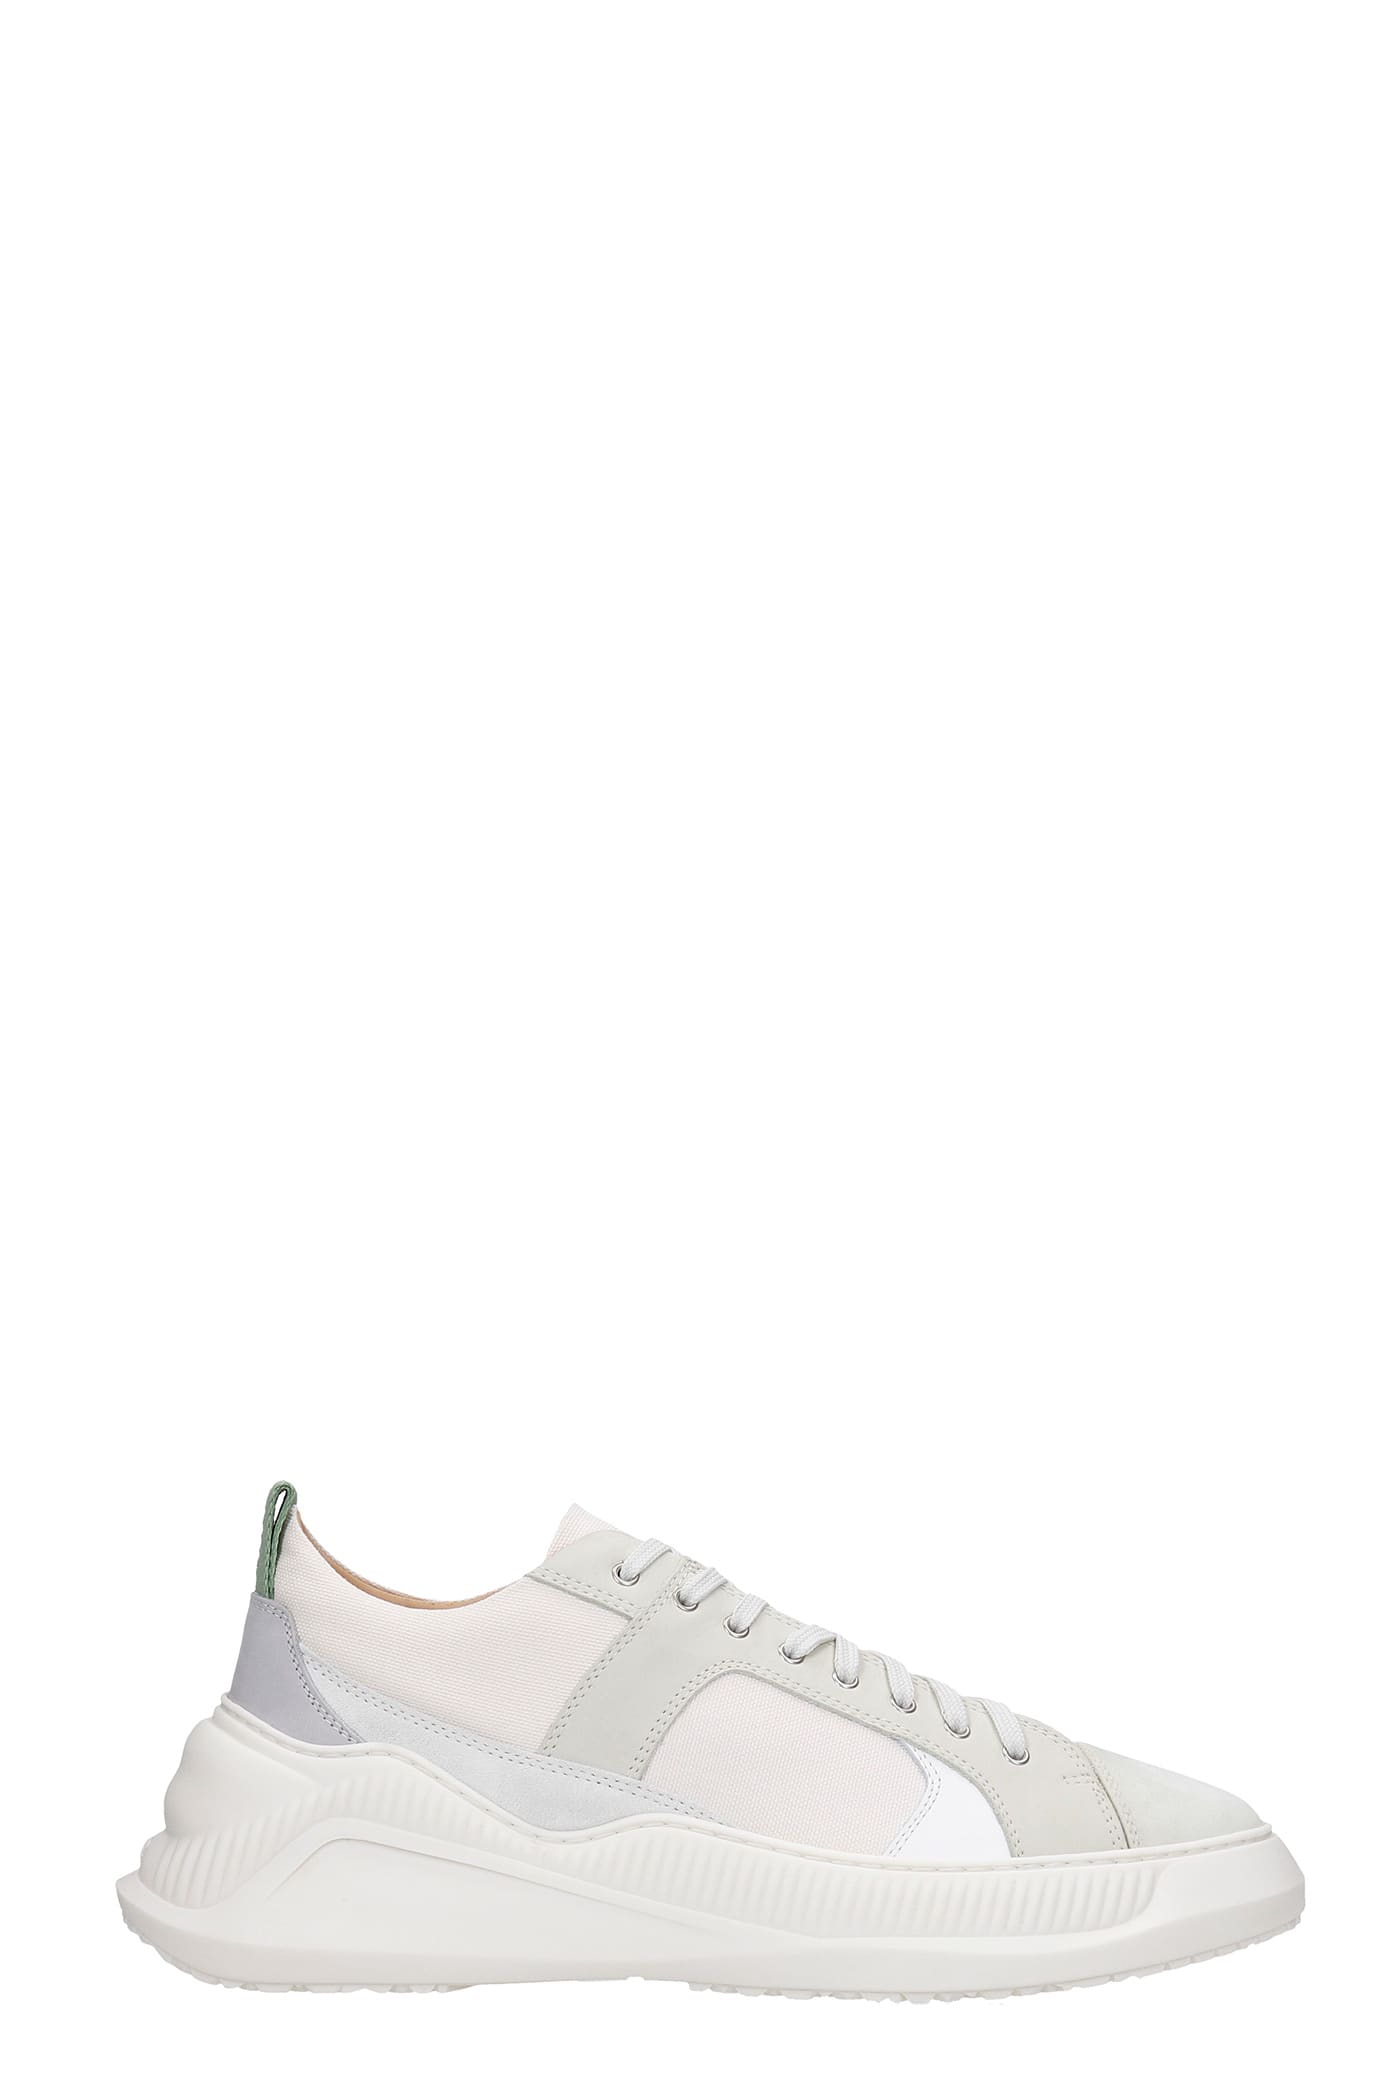 OAMC Free Solo Sneakers In White Synthetic Fibers